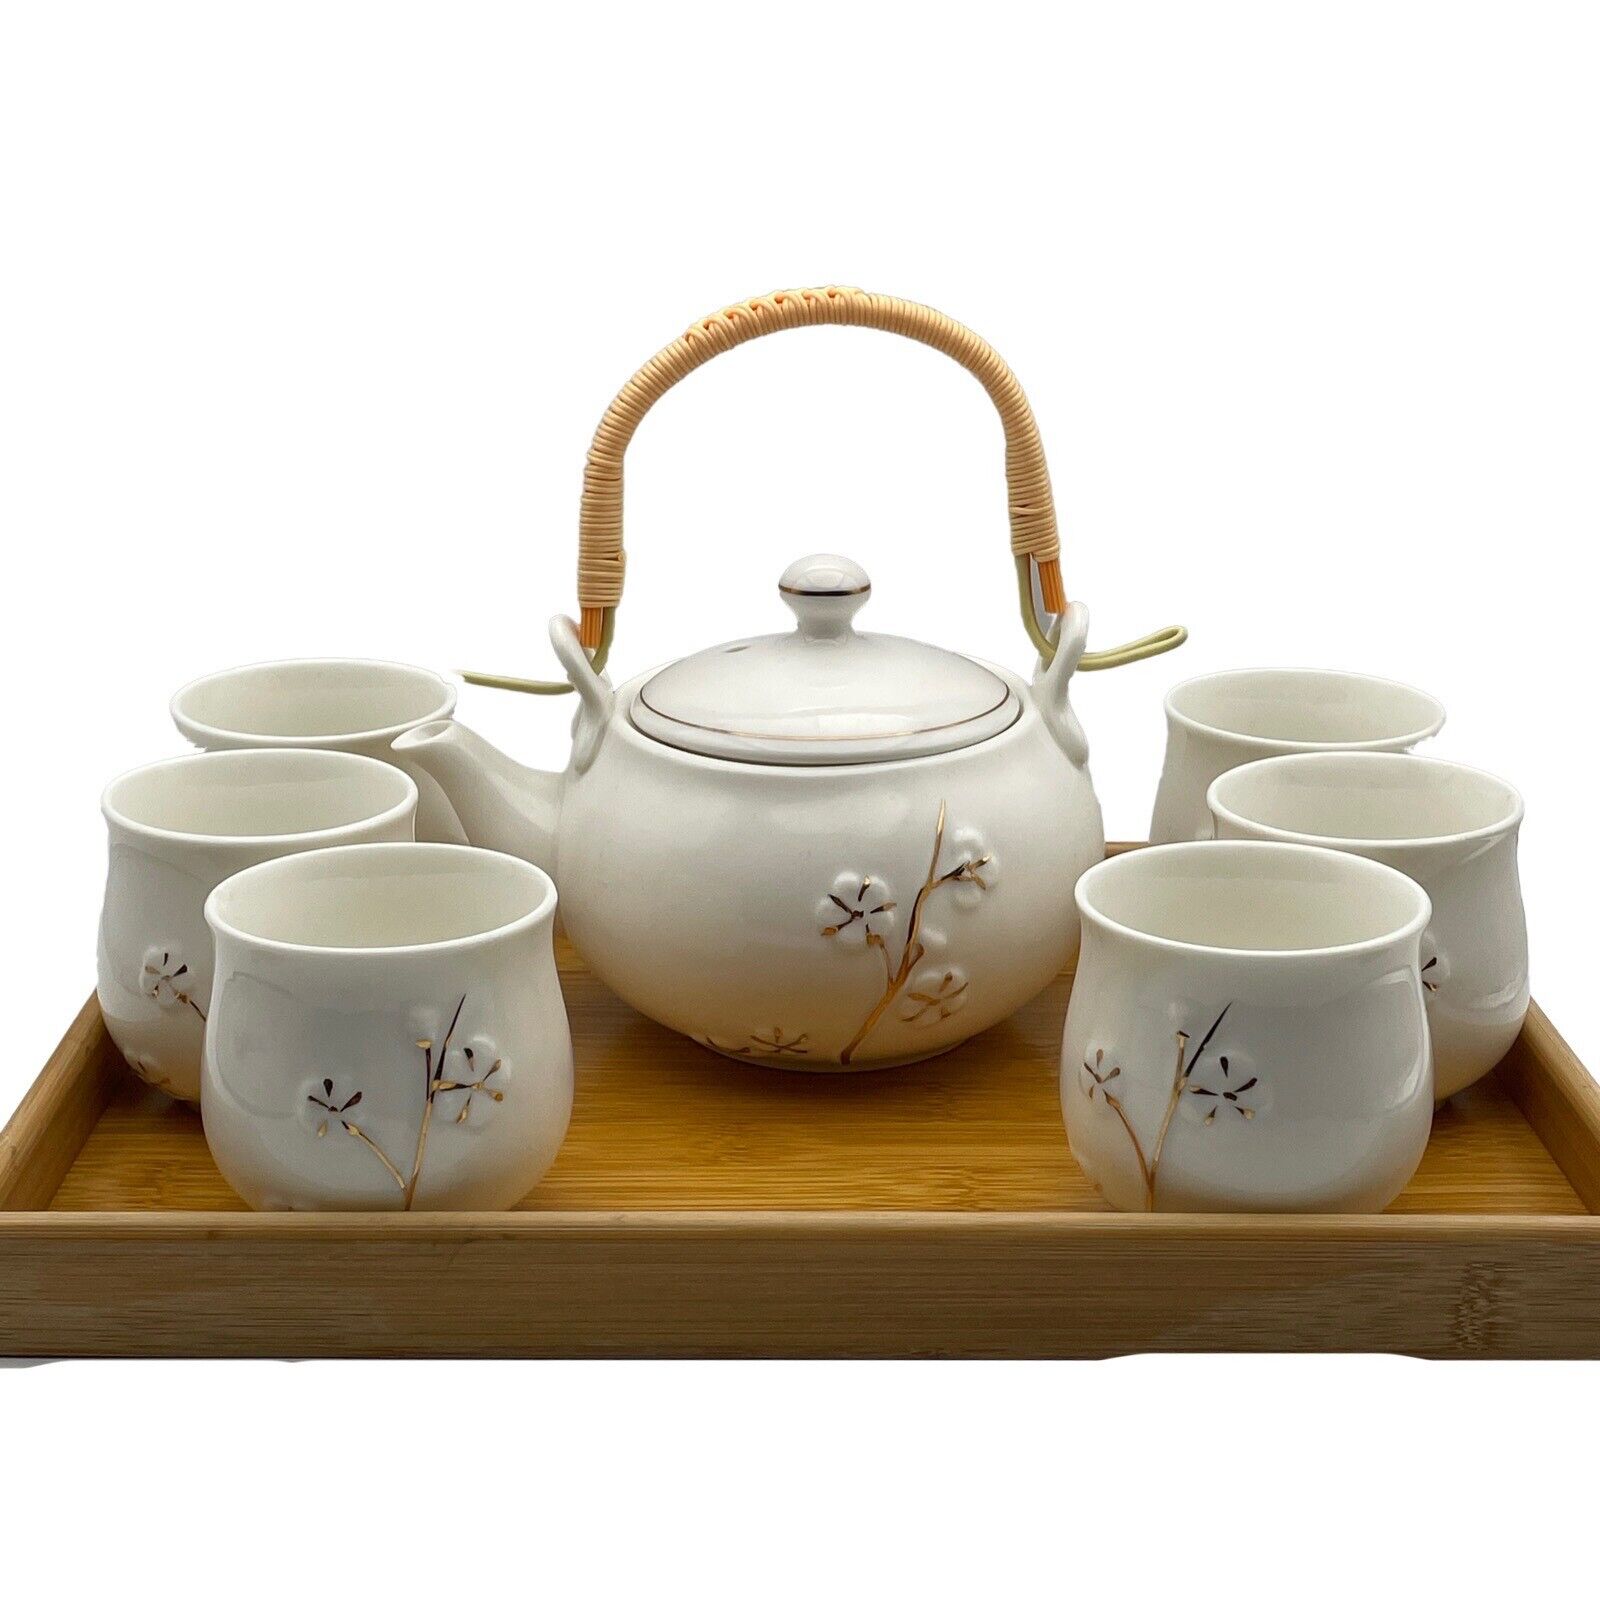 Dujust Japanese Tea Set White Pussy Willow Porcelain with 1 Teapot 6 Tea Cups